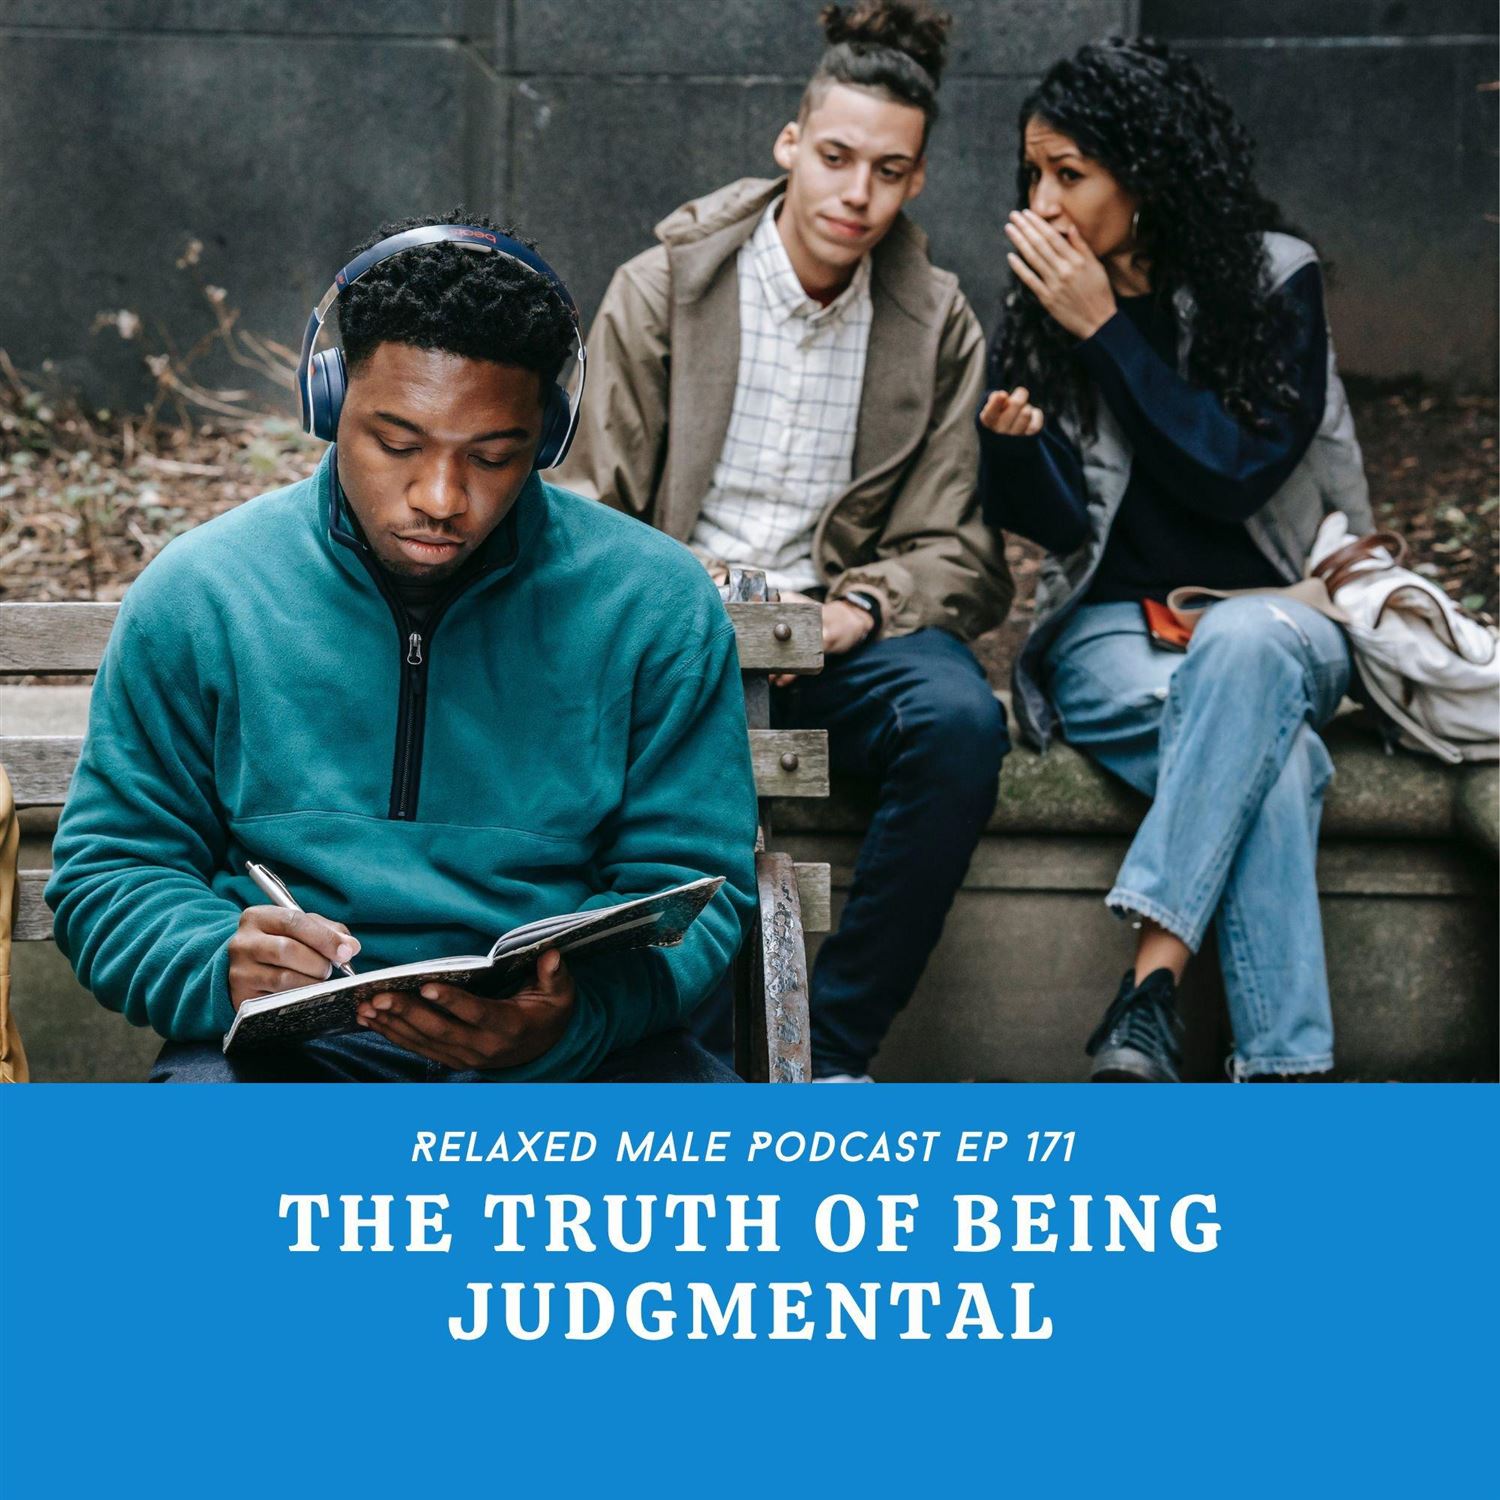 The Truth of Being Judgmental